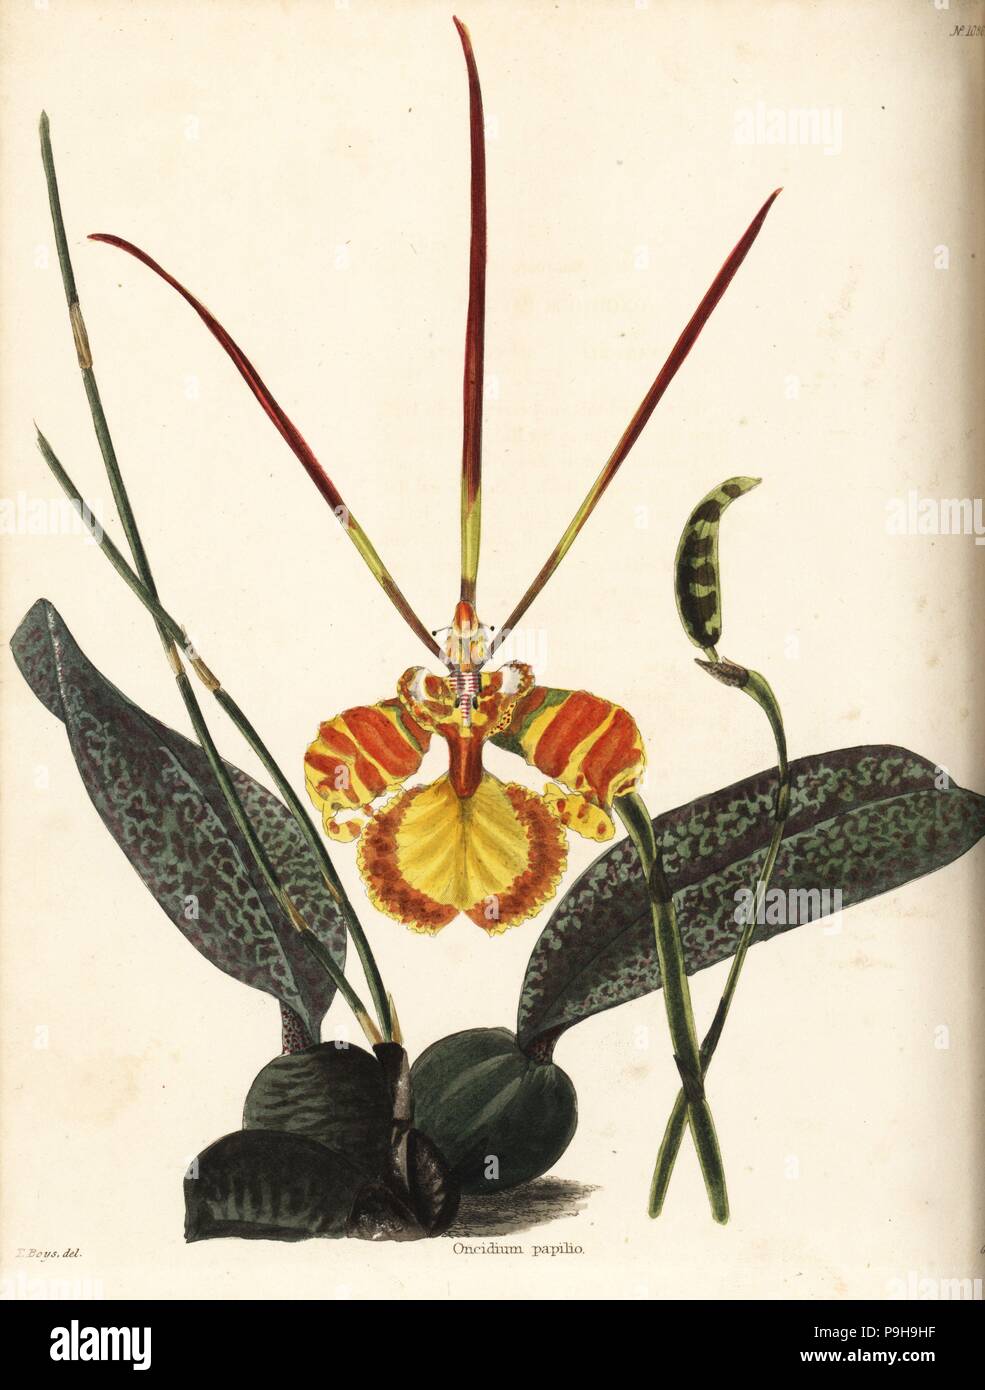 Butterfly orchid, Psychopsis papilio (Oncidium papilio). Handcoloured copperplate engraving by George Cooke after Thomas Shotter Boys from Conrad Loddiges' Botanical Cabinet, Hackney, 1825. Stock Photo